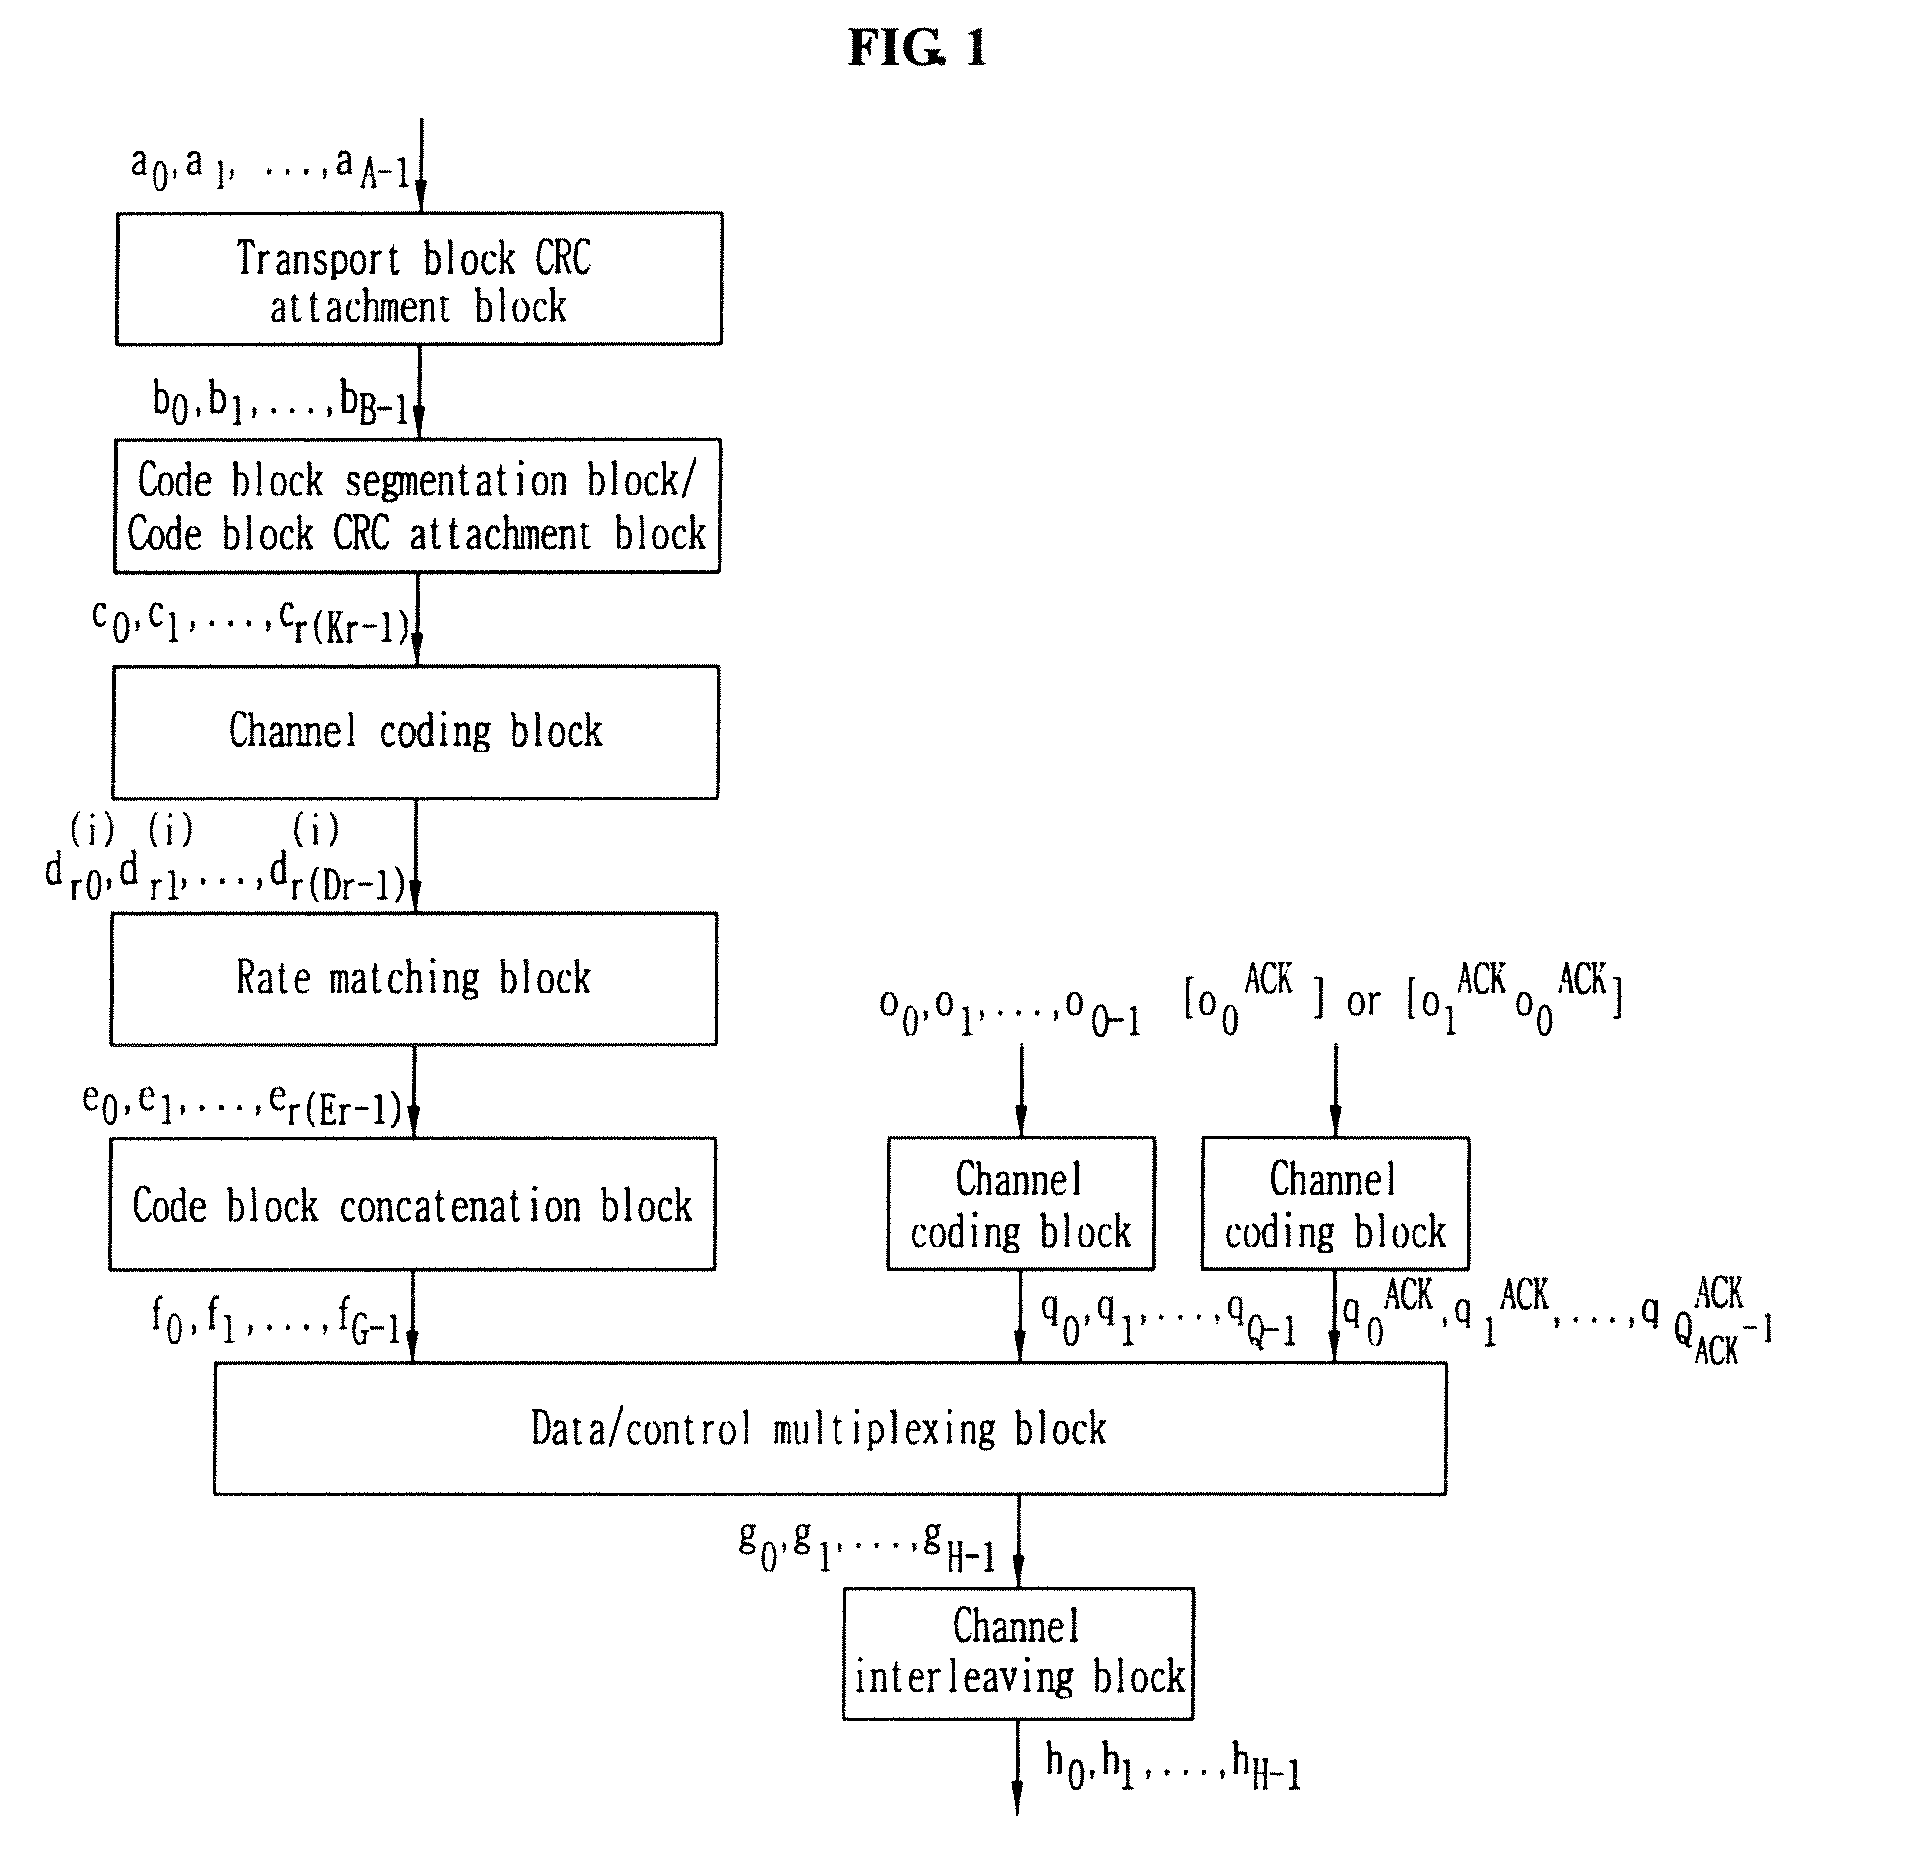 Method for multiplexing data and control information